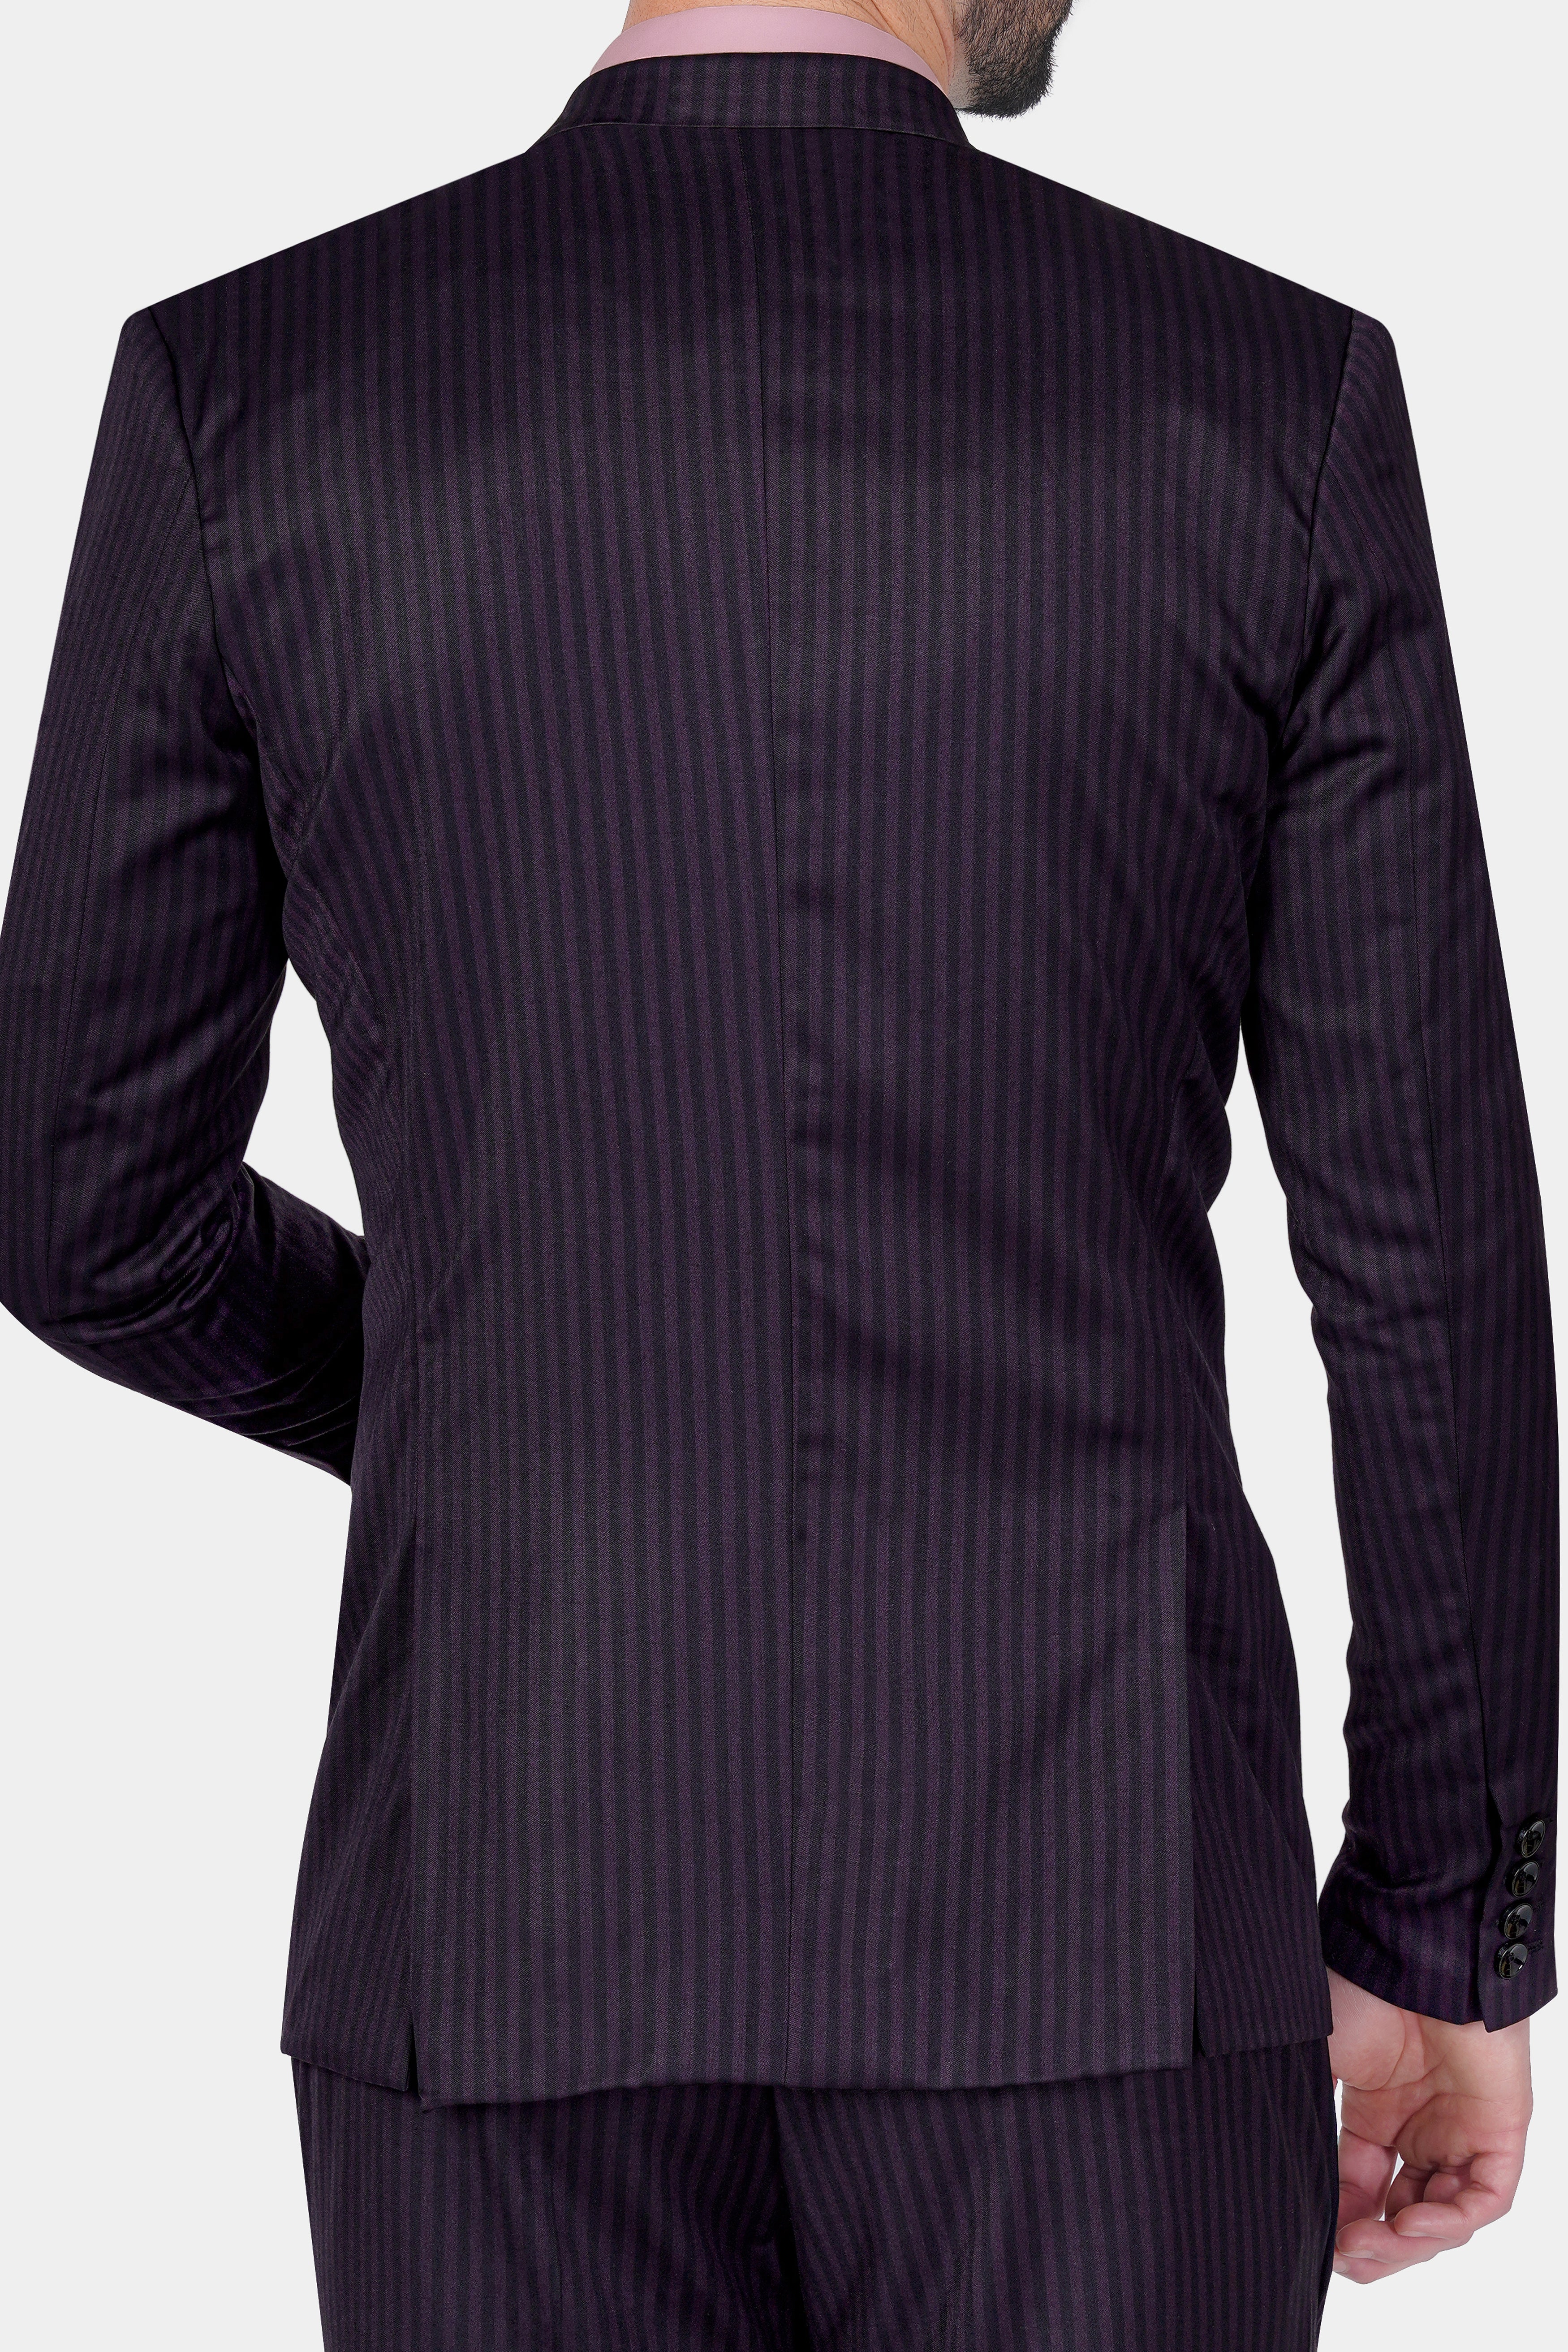 Imperial Purple and Black Striped Wool Rich Blazer BL3119-SB-36, BL3119-SB-38, BL3119-SB-40, BL3119-SB-42, BL3119-SB-44, BL3119-SB-46, BL3119-SB-48, BL3119-SB-50, BL3119-SB-52, BL3119-SB-54, BL3119-SB-56, BL3119-SB-58, BL3119-SB-60